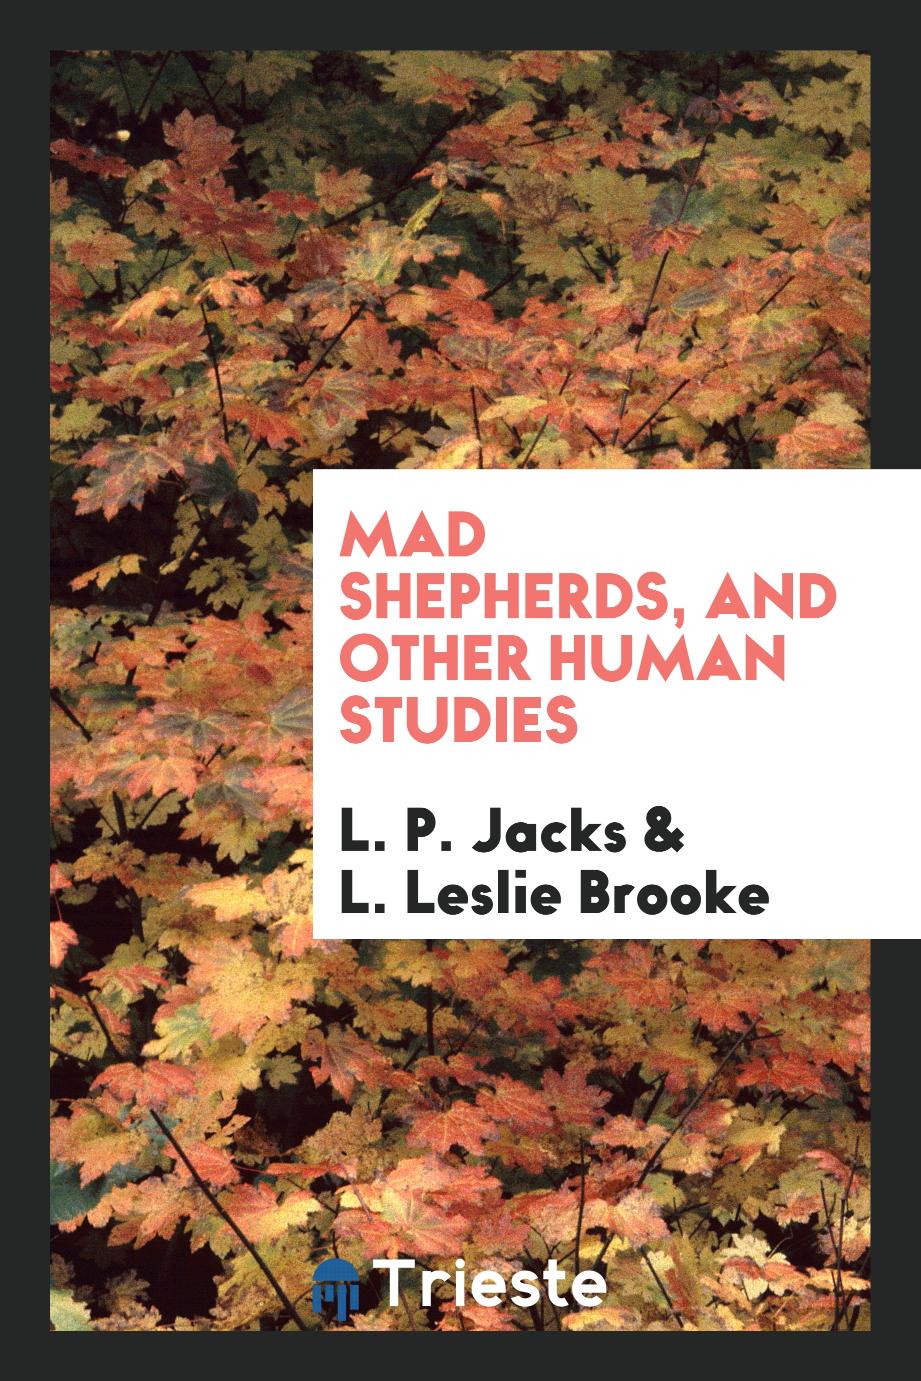 Mad shepherds, and other human studies